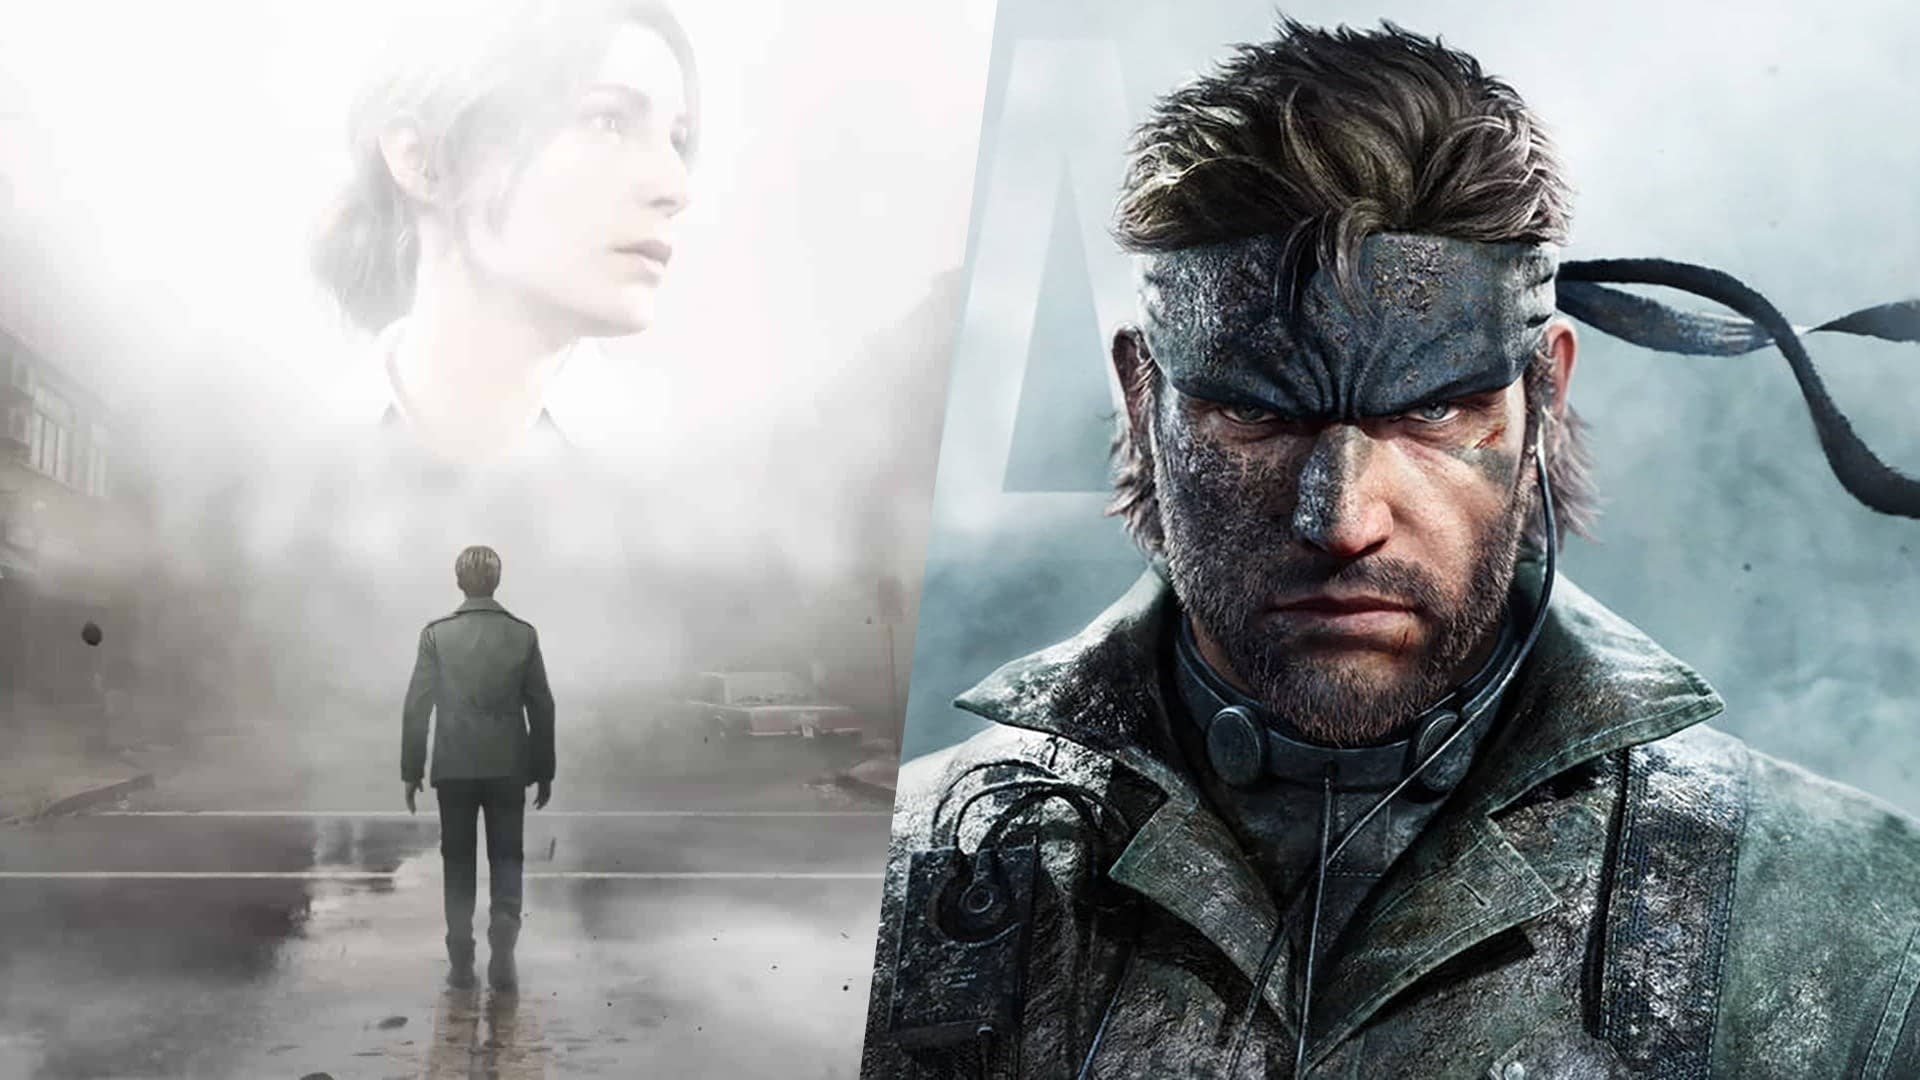 Metal Gear Solid Delta and Silent Hill 2 This Year Comes By Playstation